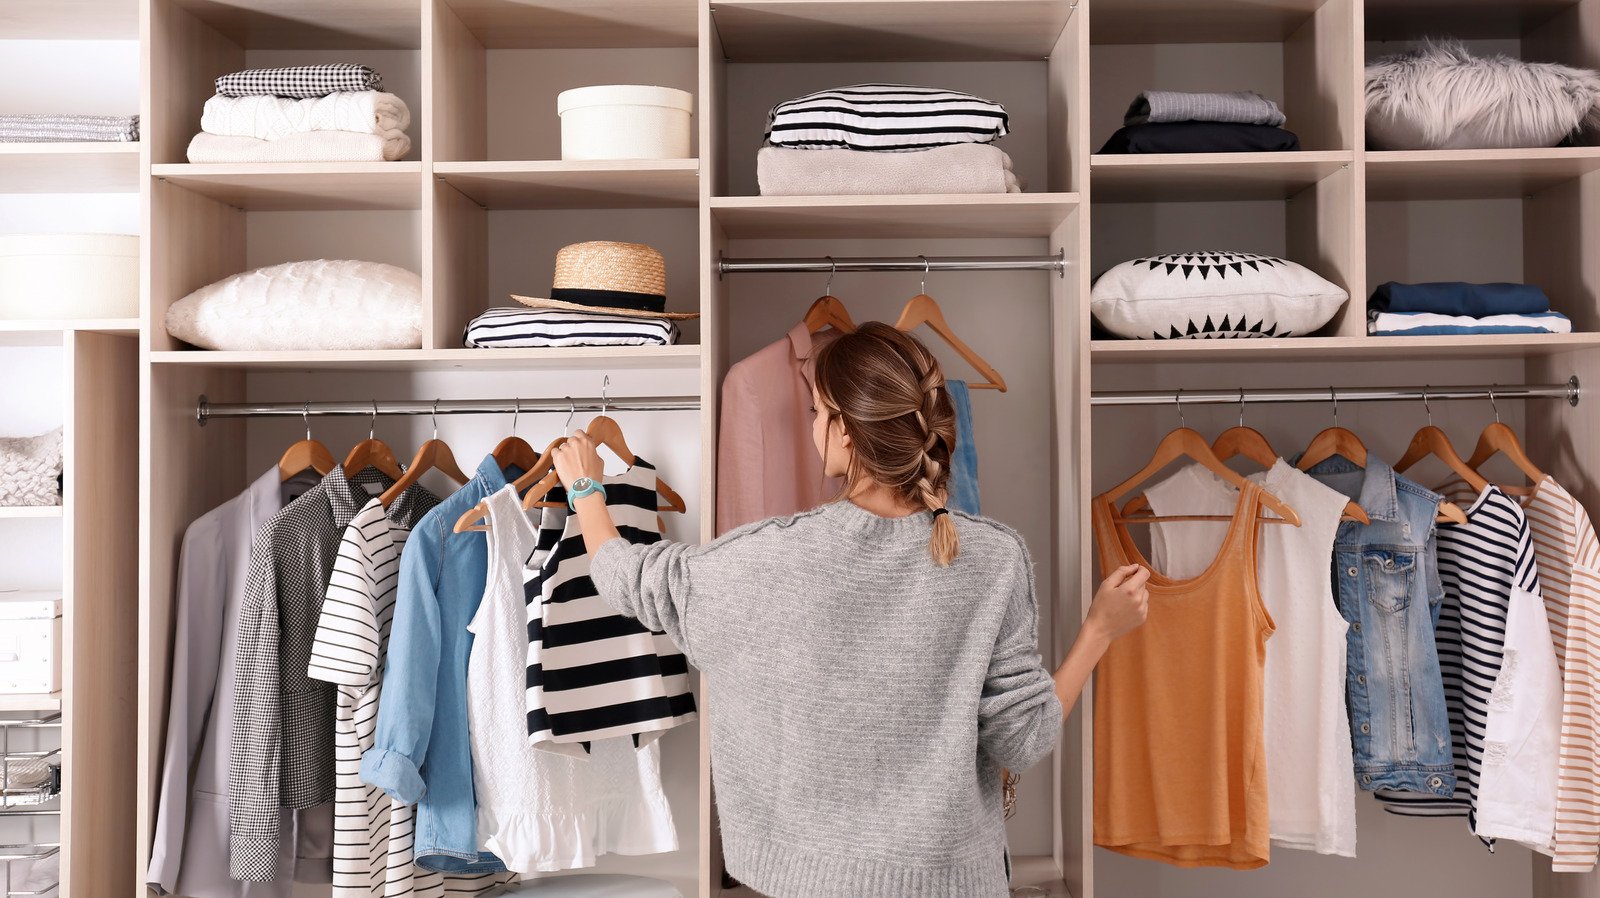 What Is The Difference Between Wardrobe And Closet?